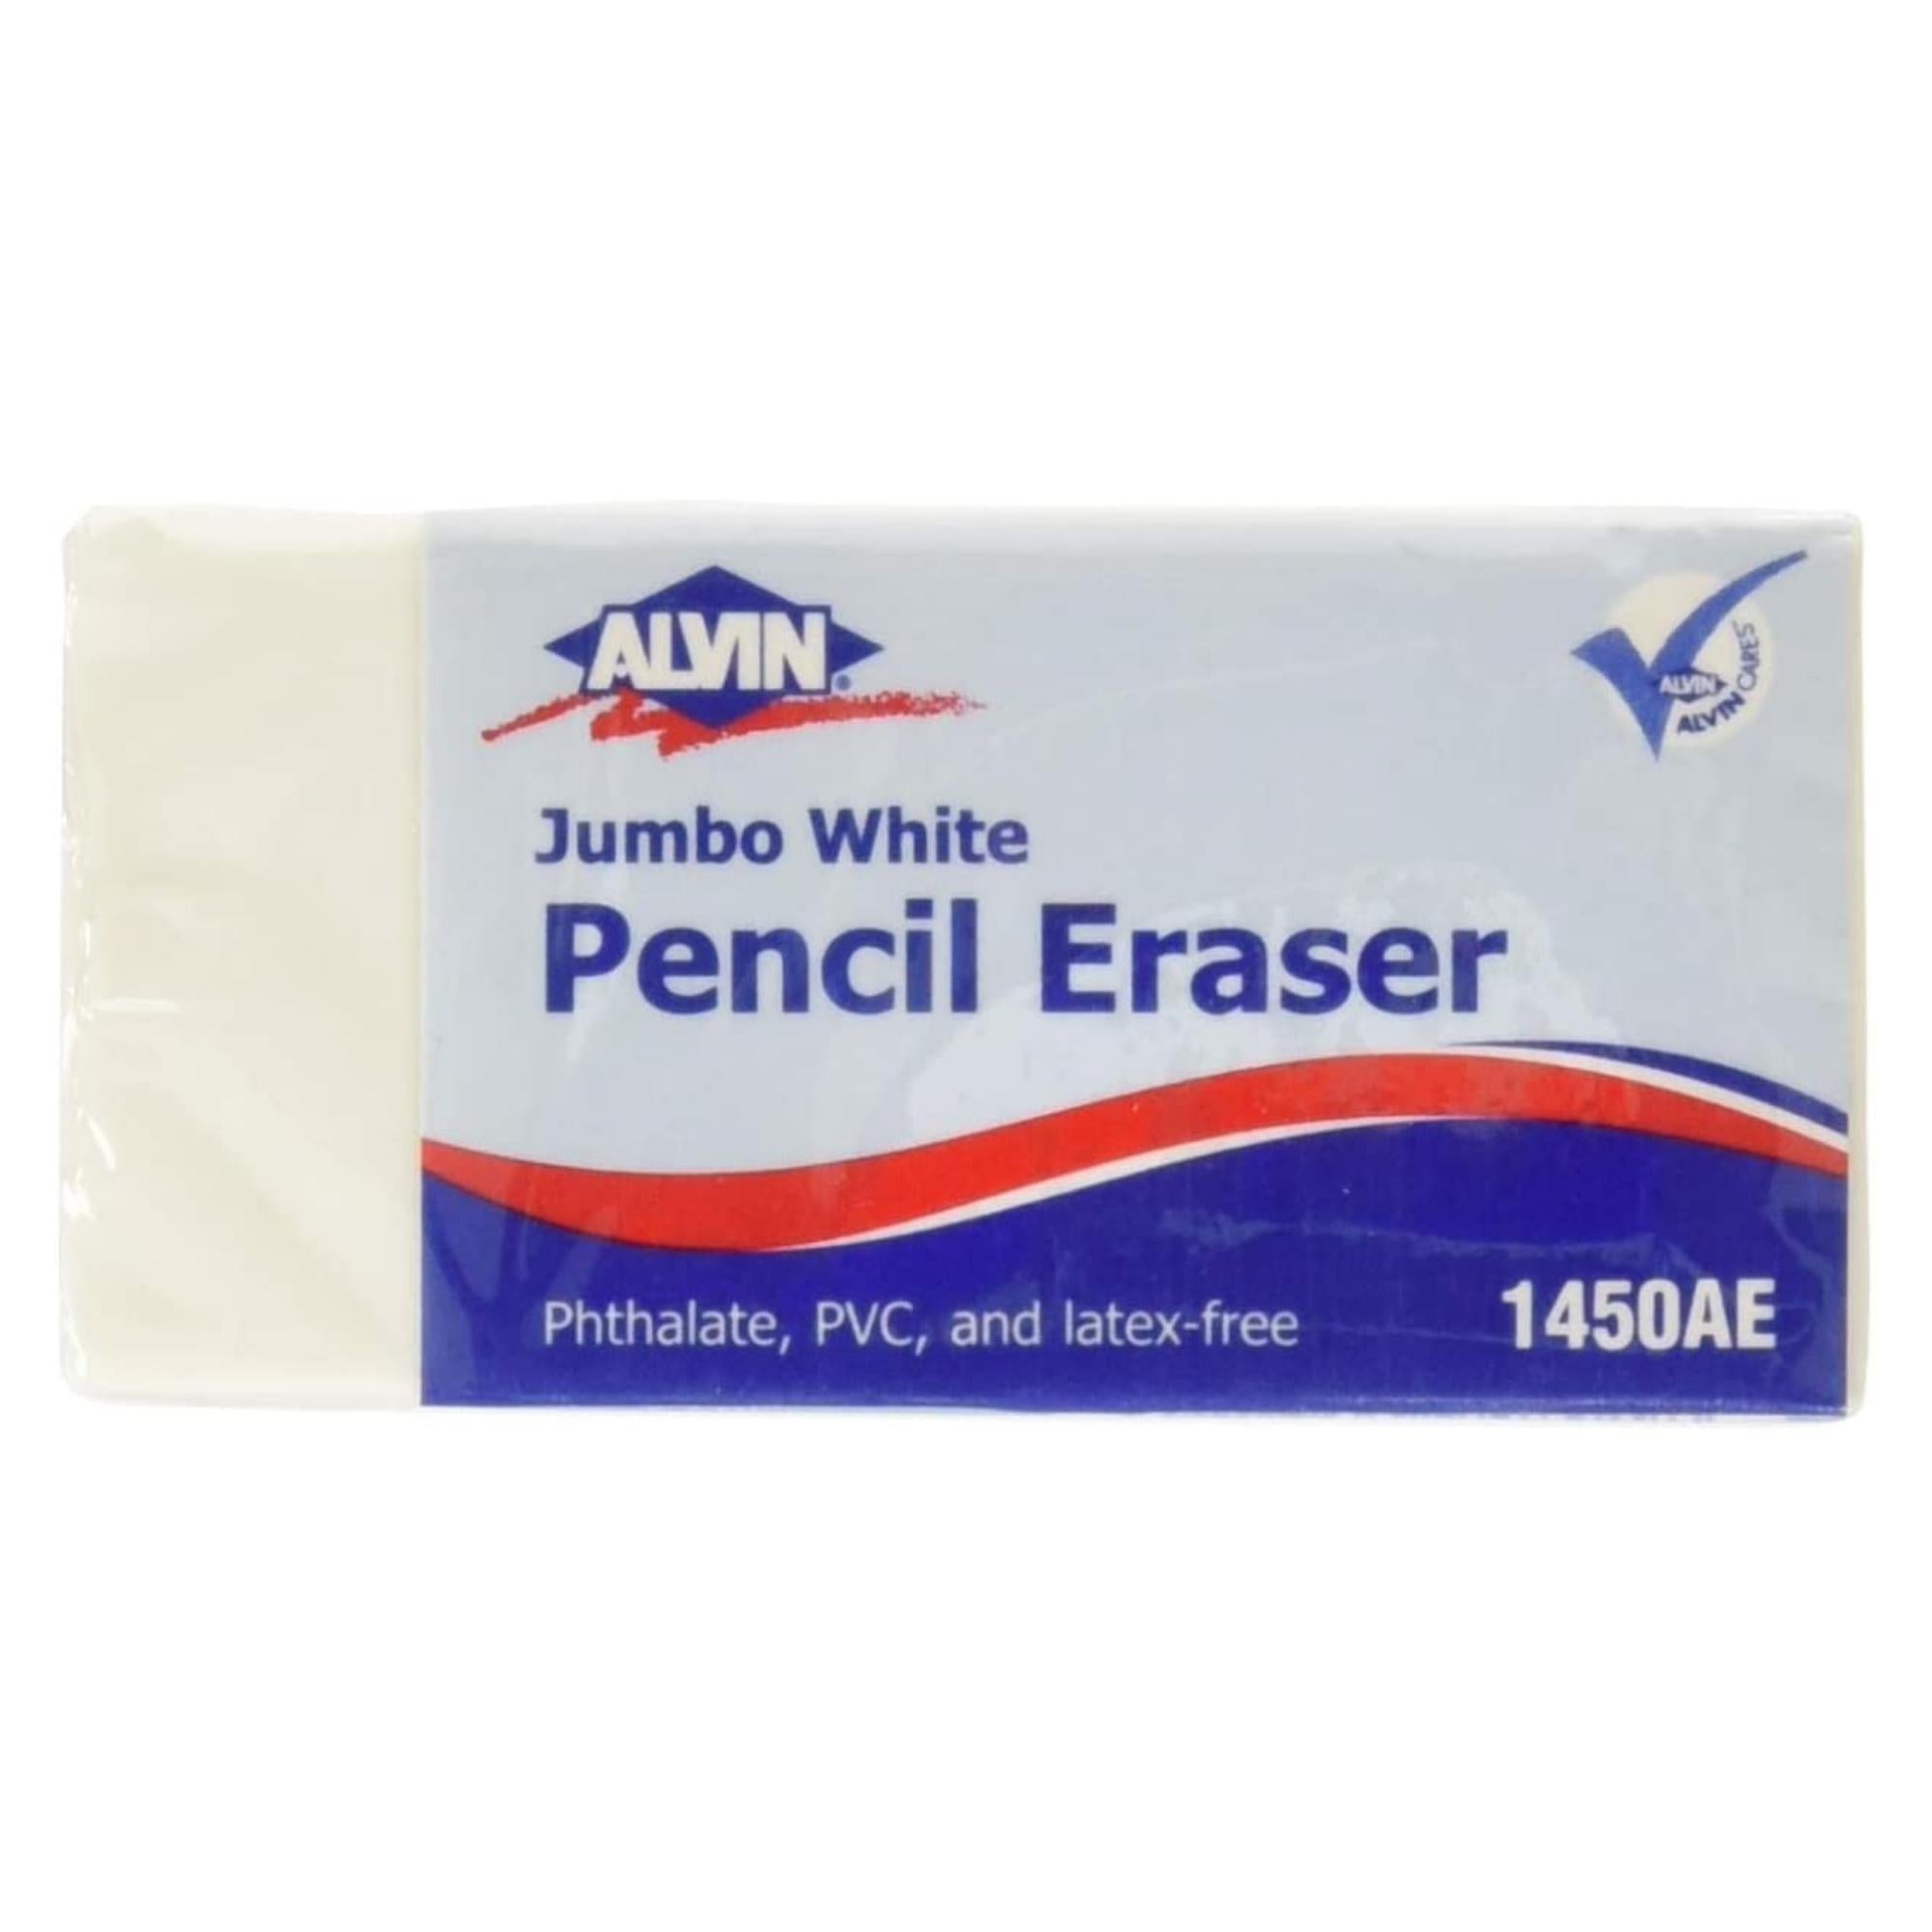 Soft White Eraser Replacements: Pack of 15 – ALVIN Drafting, LLC